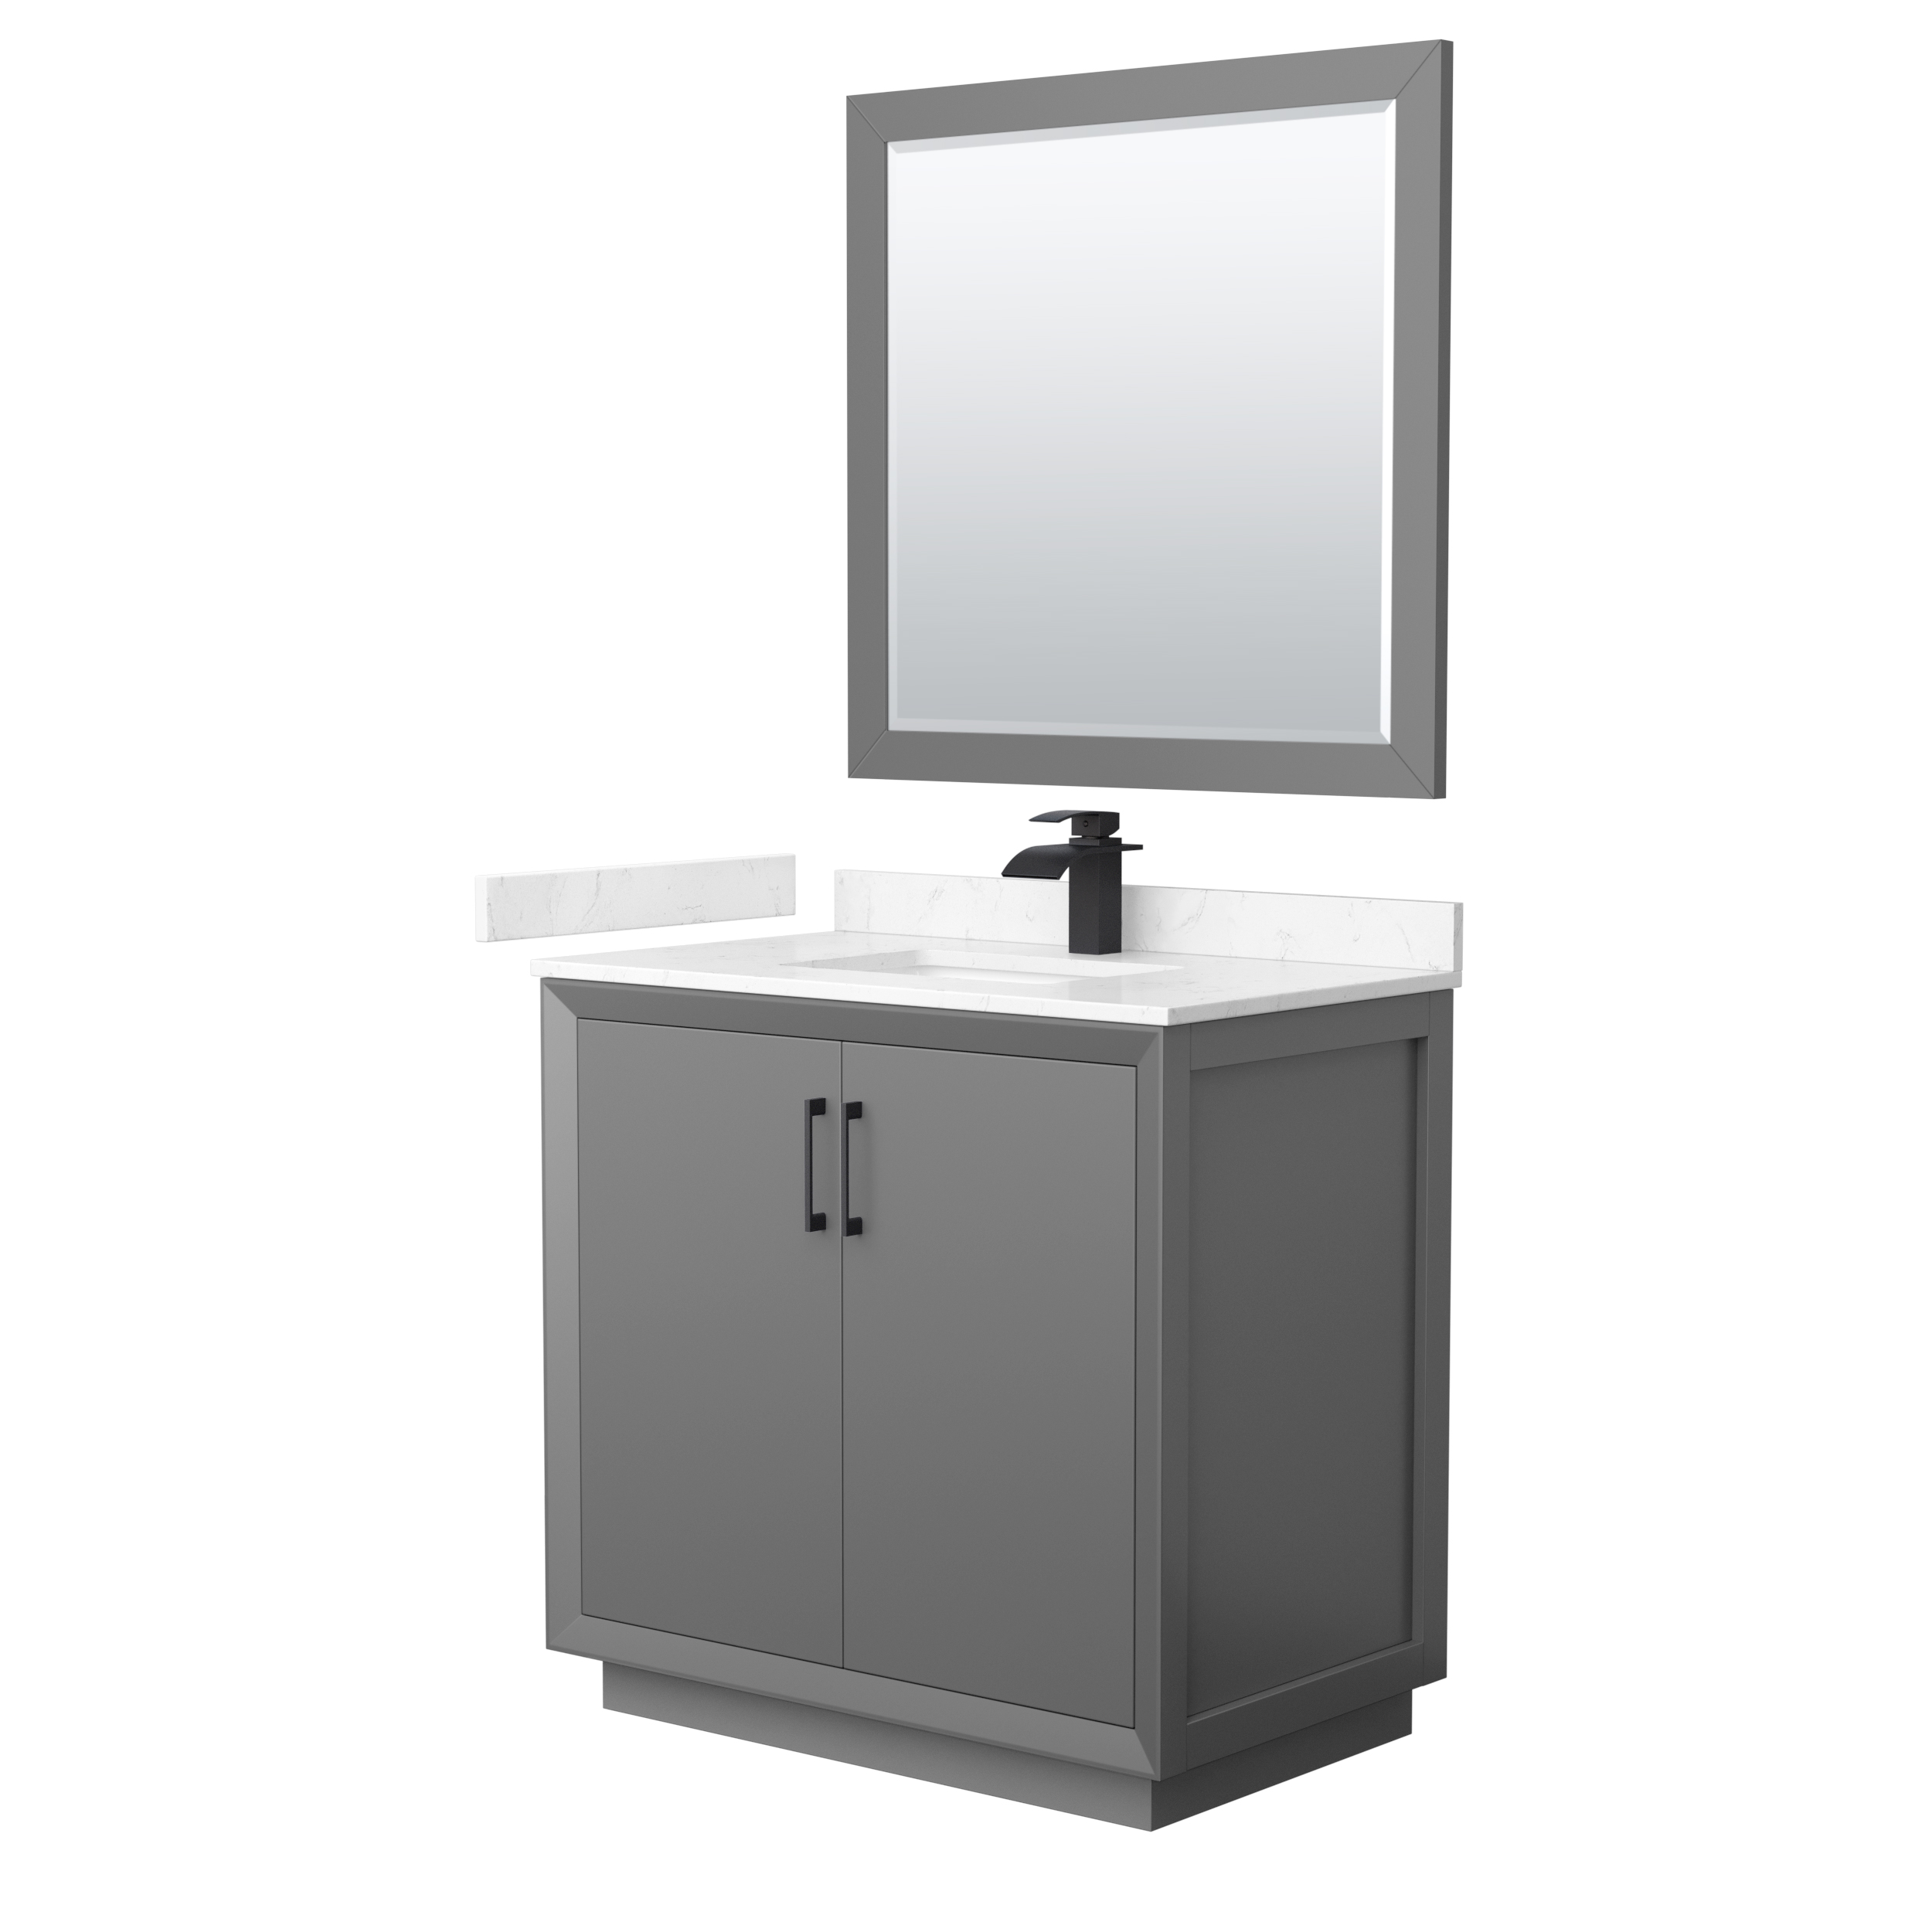 36" Transitional Single Vanity Base in Dark Grey, 3 Top Option with 3 Hardware Options and Mirror Option